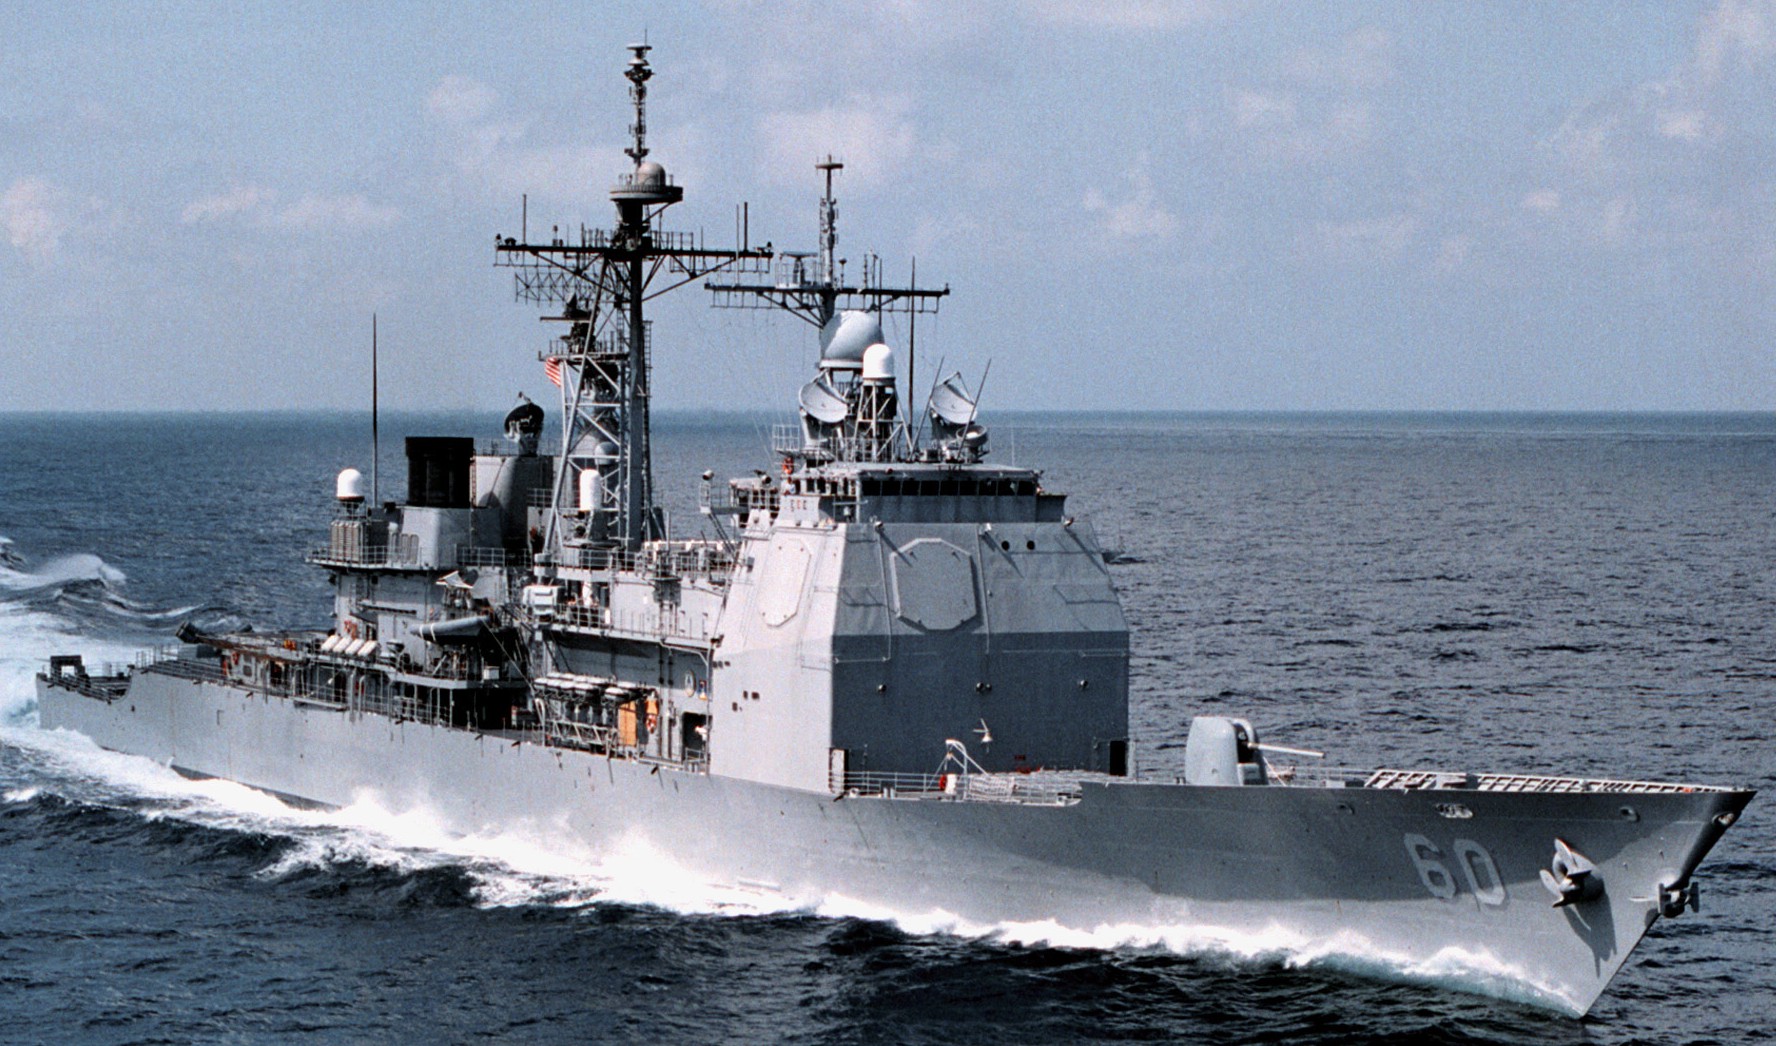 cg-60 uss normandy ticonderoga class guided missile cruiser aegis us navy southern watch 140